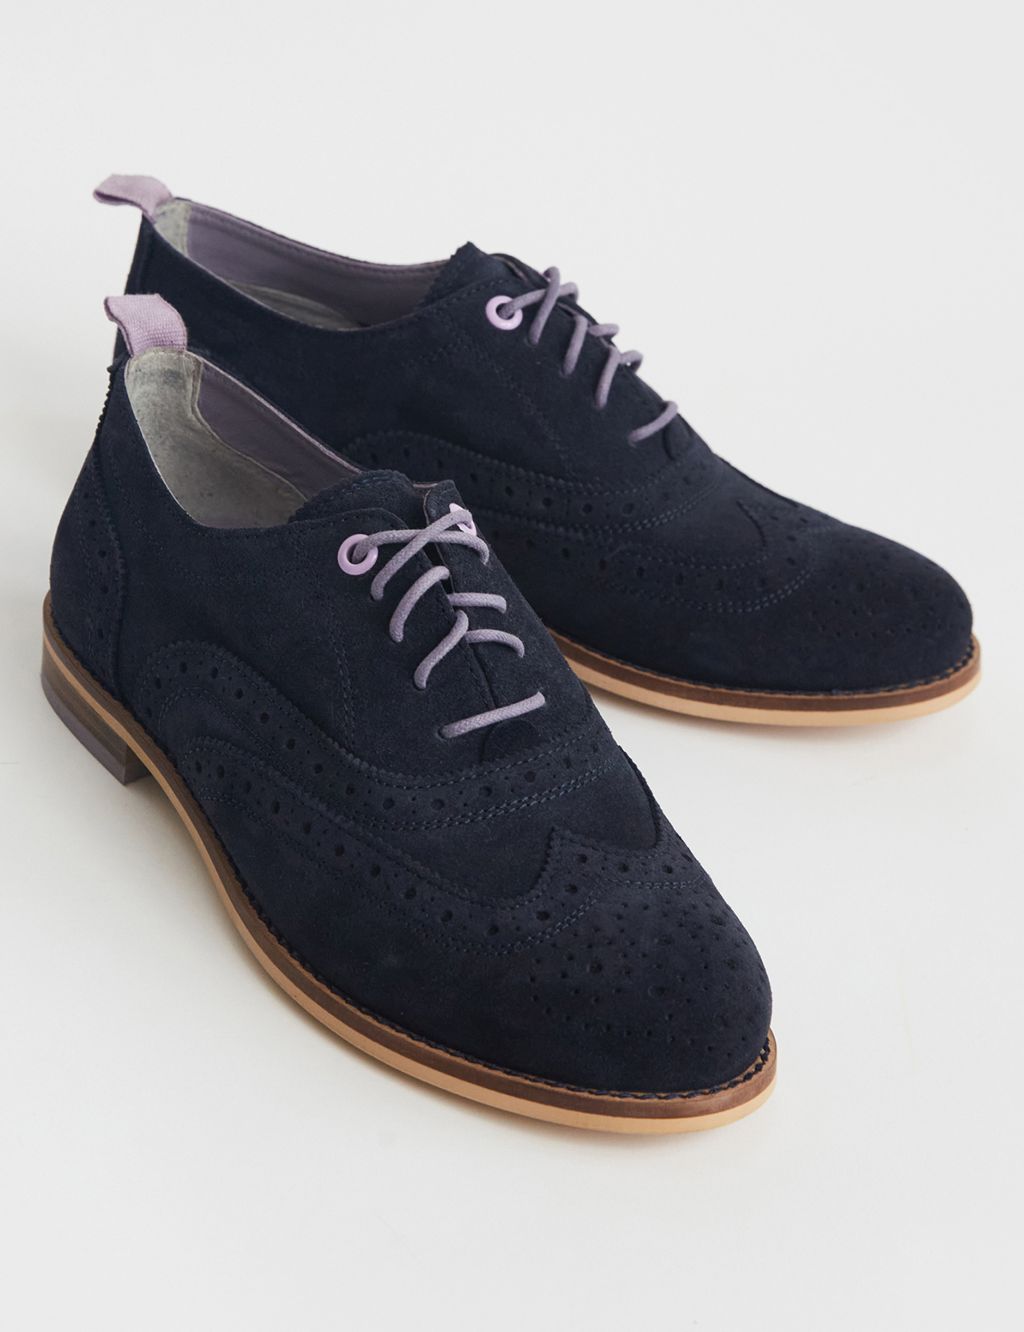 Suede Lace Up Flat Brogues image 2